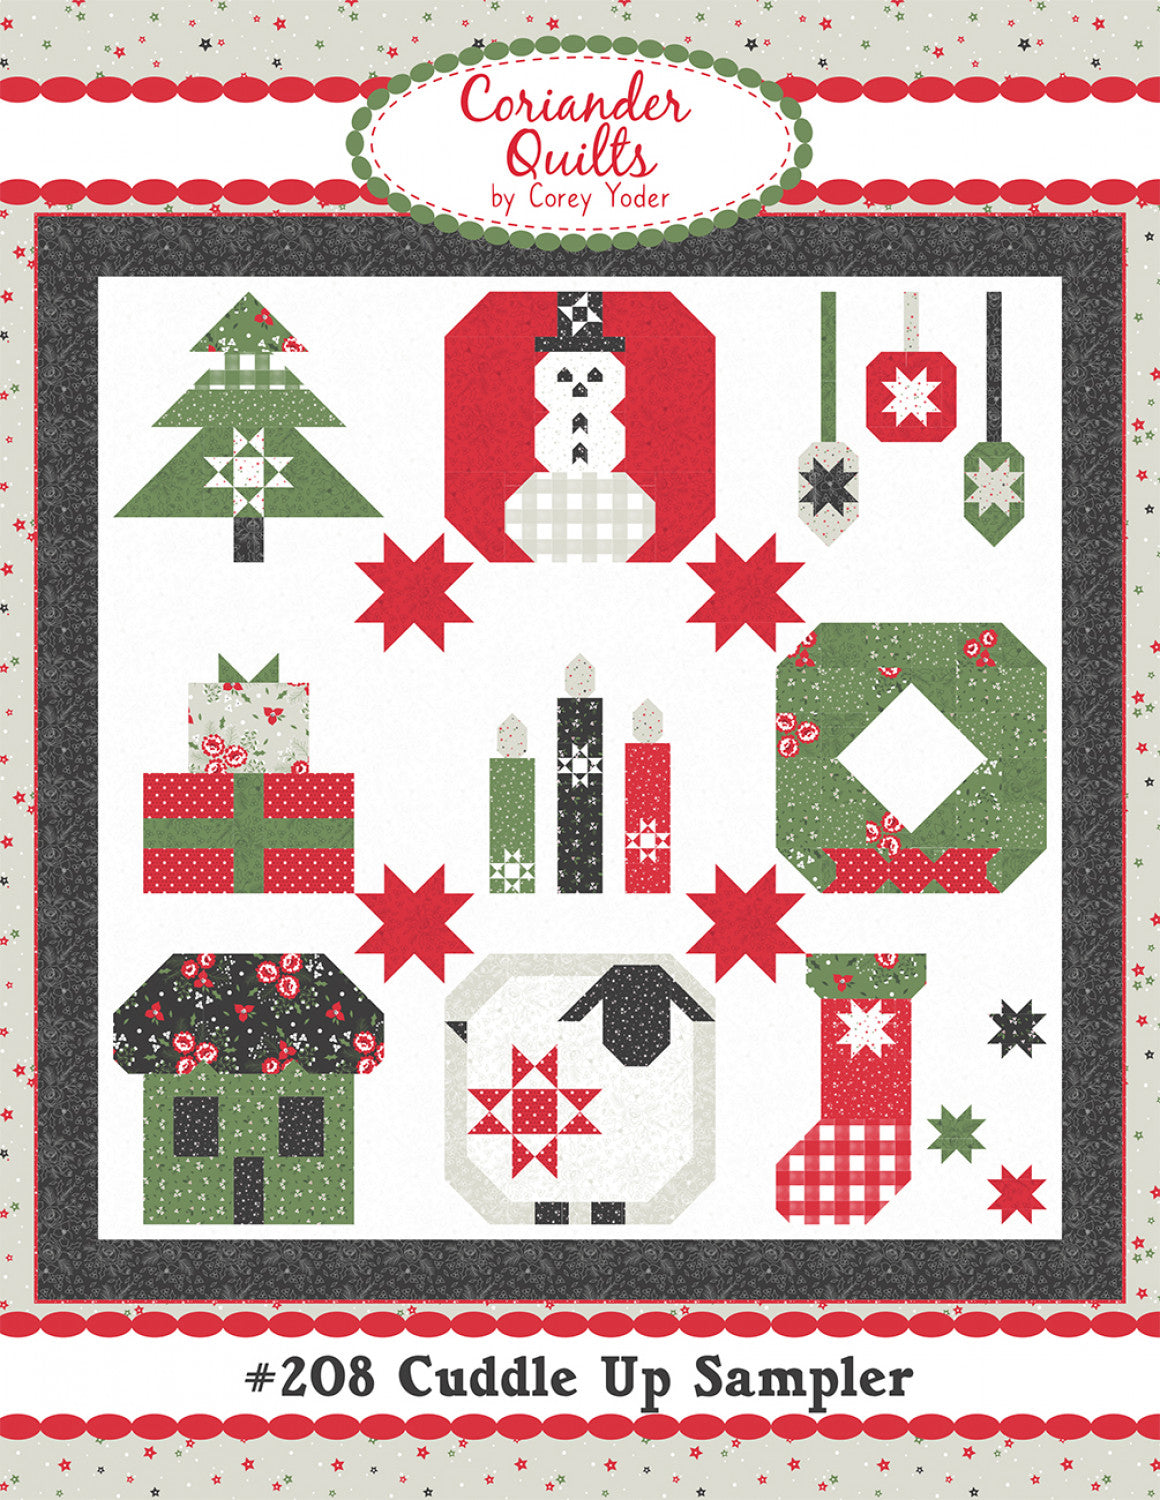 Cuddle Up Sampler Quilt Pattern by Coriander Quilts